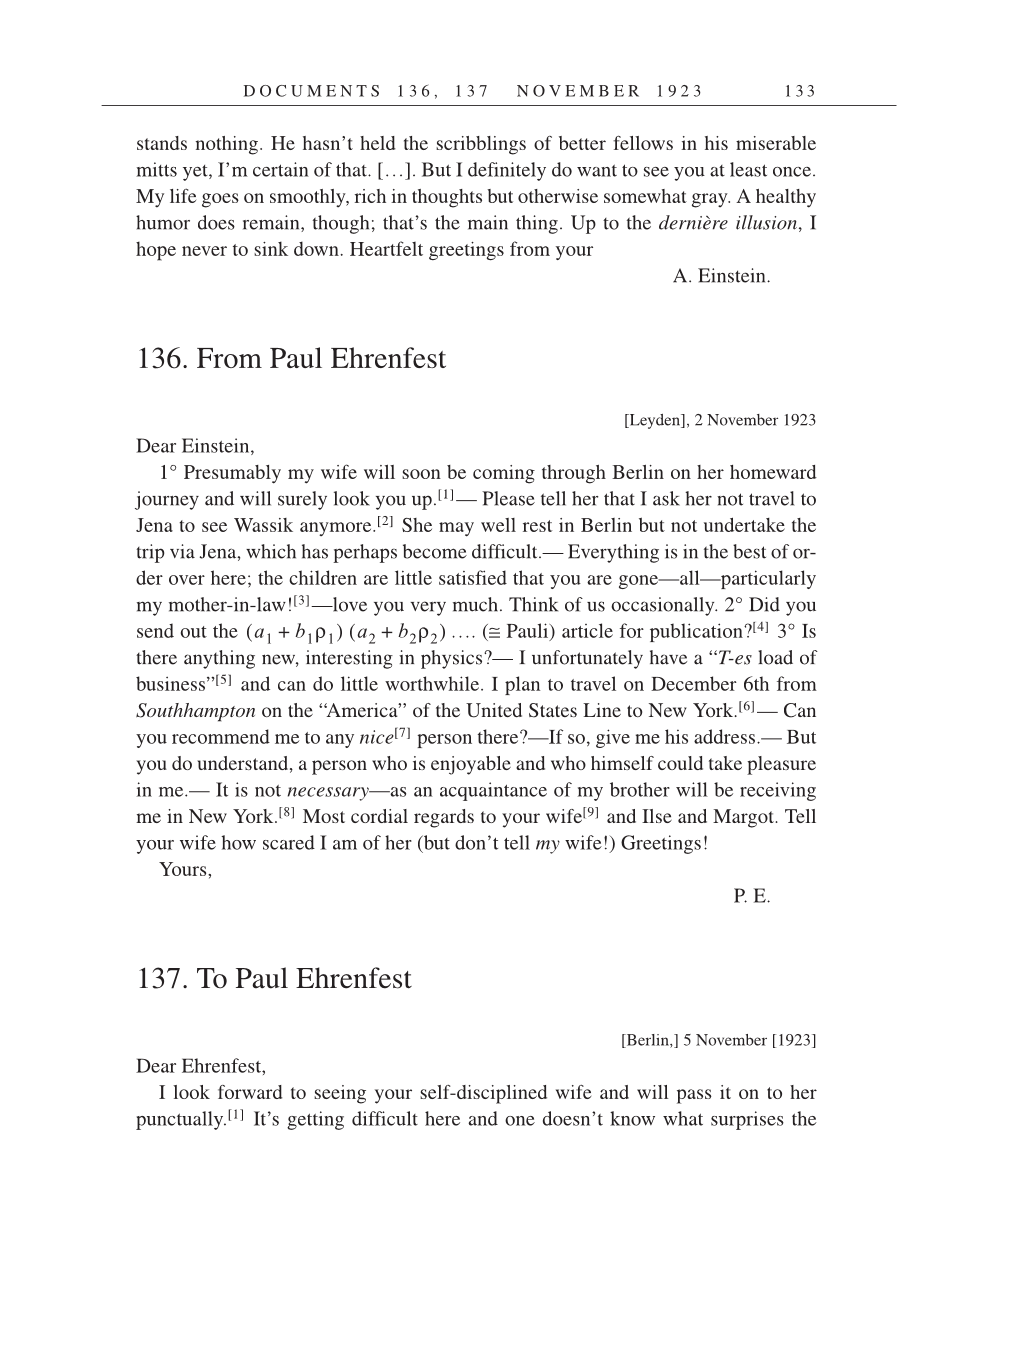 Volume 14: The Berlin Years: Writings & Correspondence, April 1923-May 1925 (English Translation Supplement) page 133